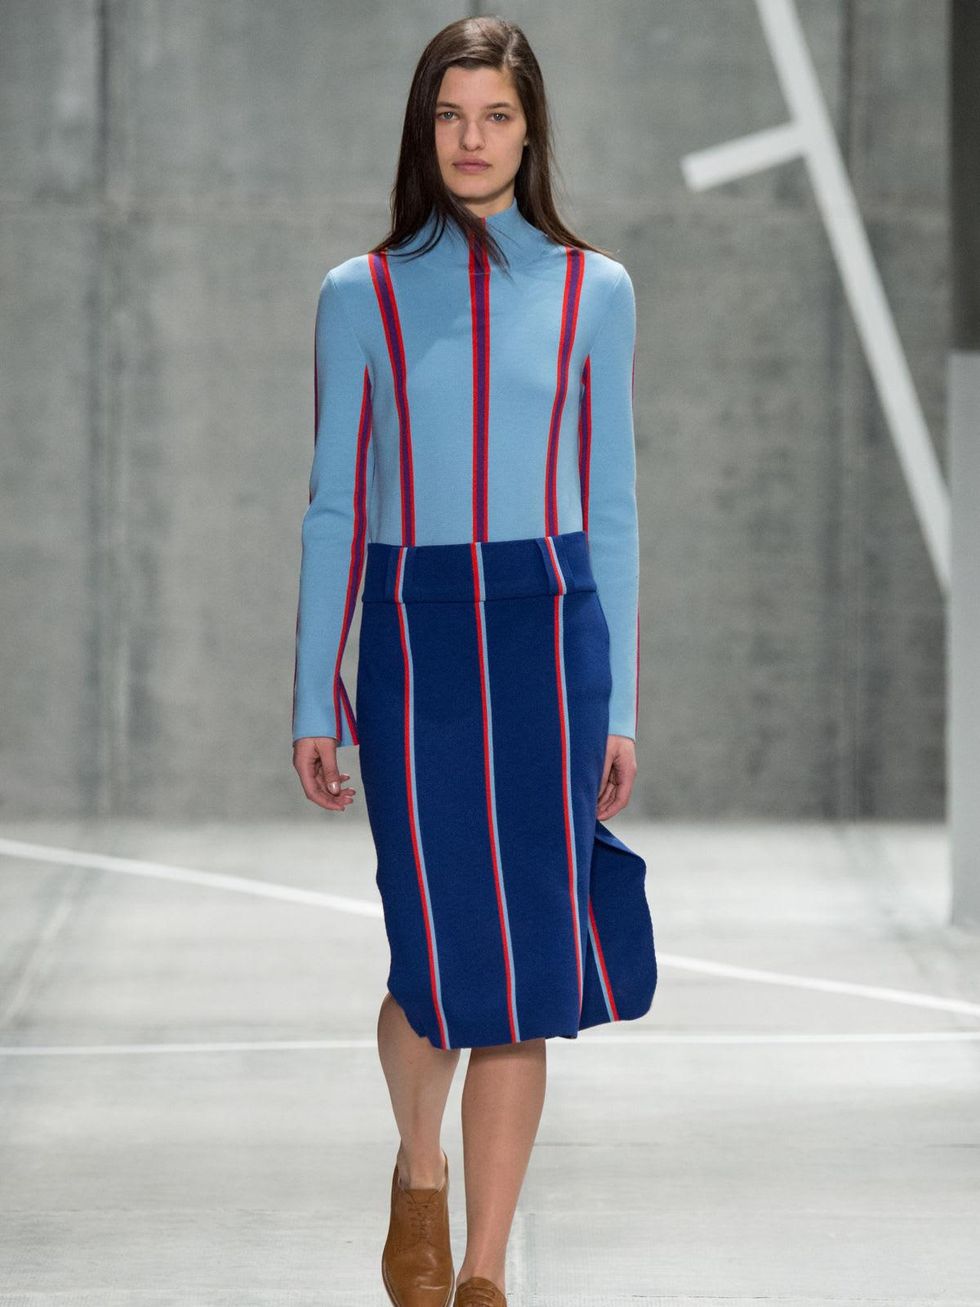 Clifford New York Fashion Week fall 2015 Lacoste April 2015 Look_013